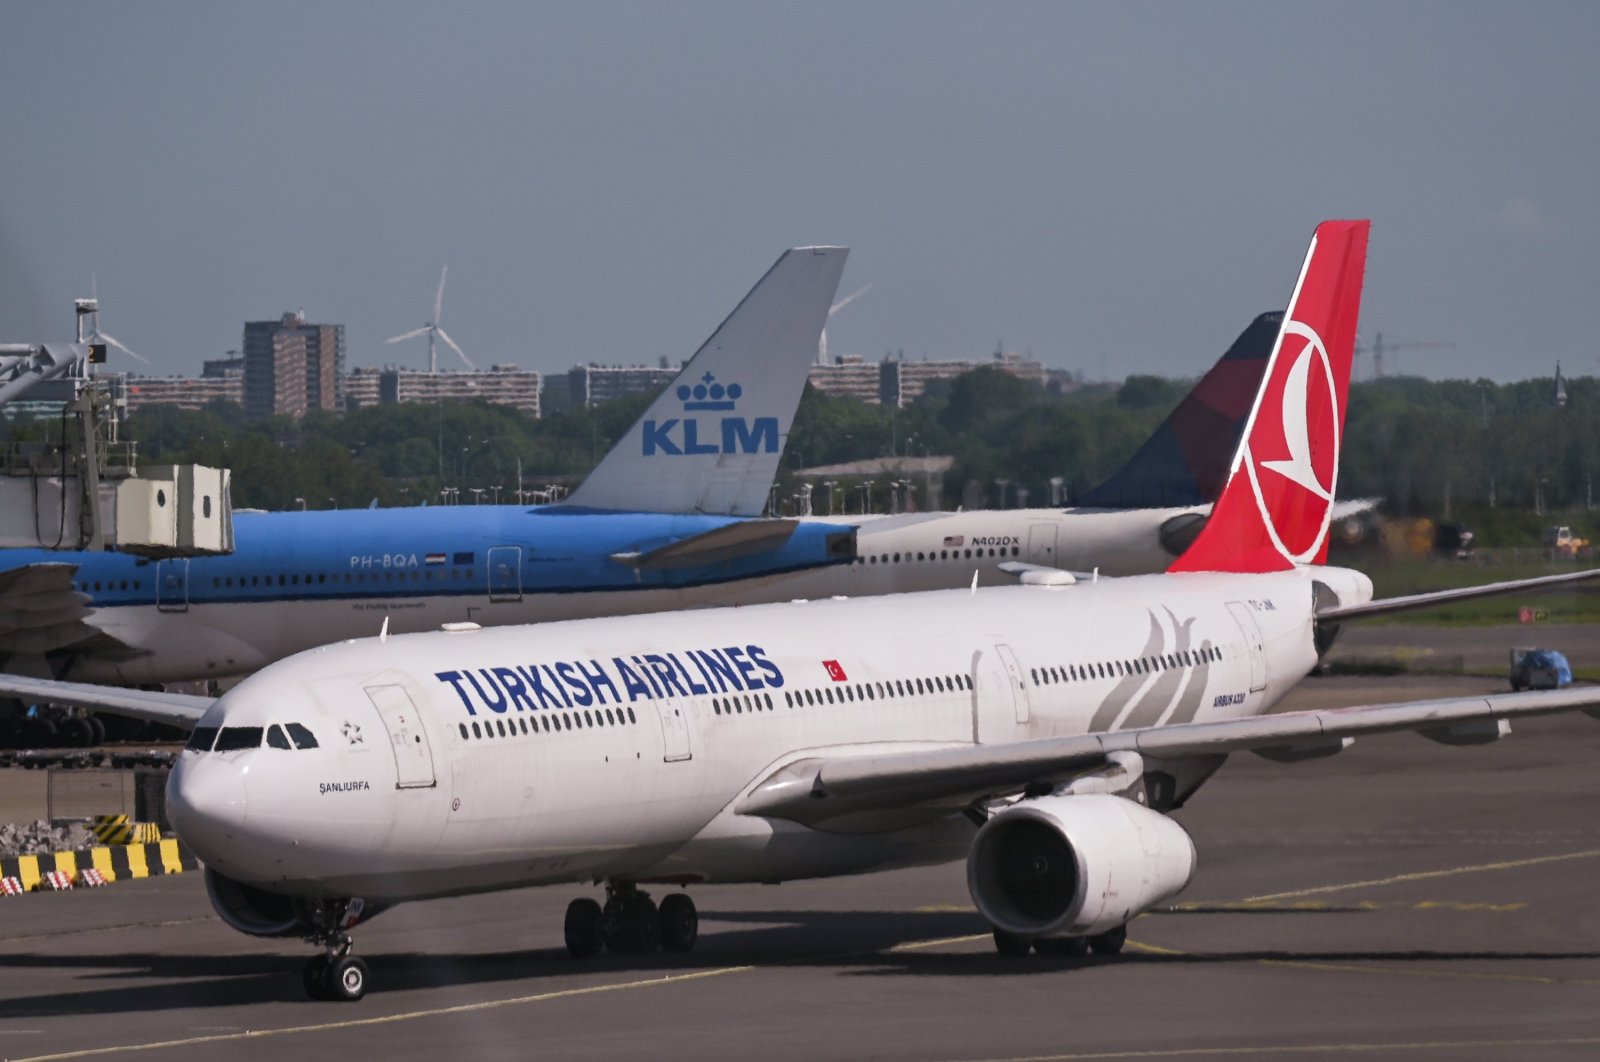 A Turkish Airlines aircraft is seen at the Schiphol Airport, Amsterdam, Netherlands, May 22, 2022. (Reuters Photo)